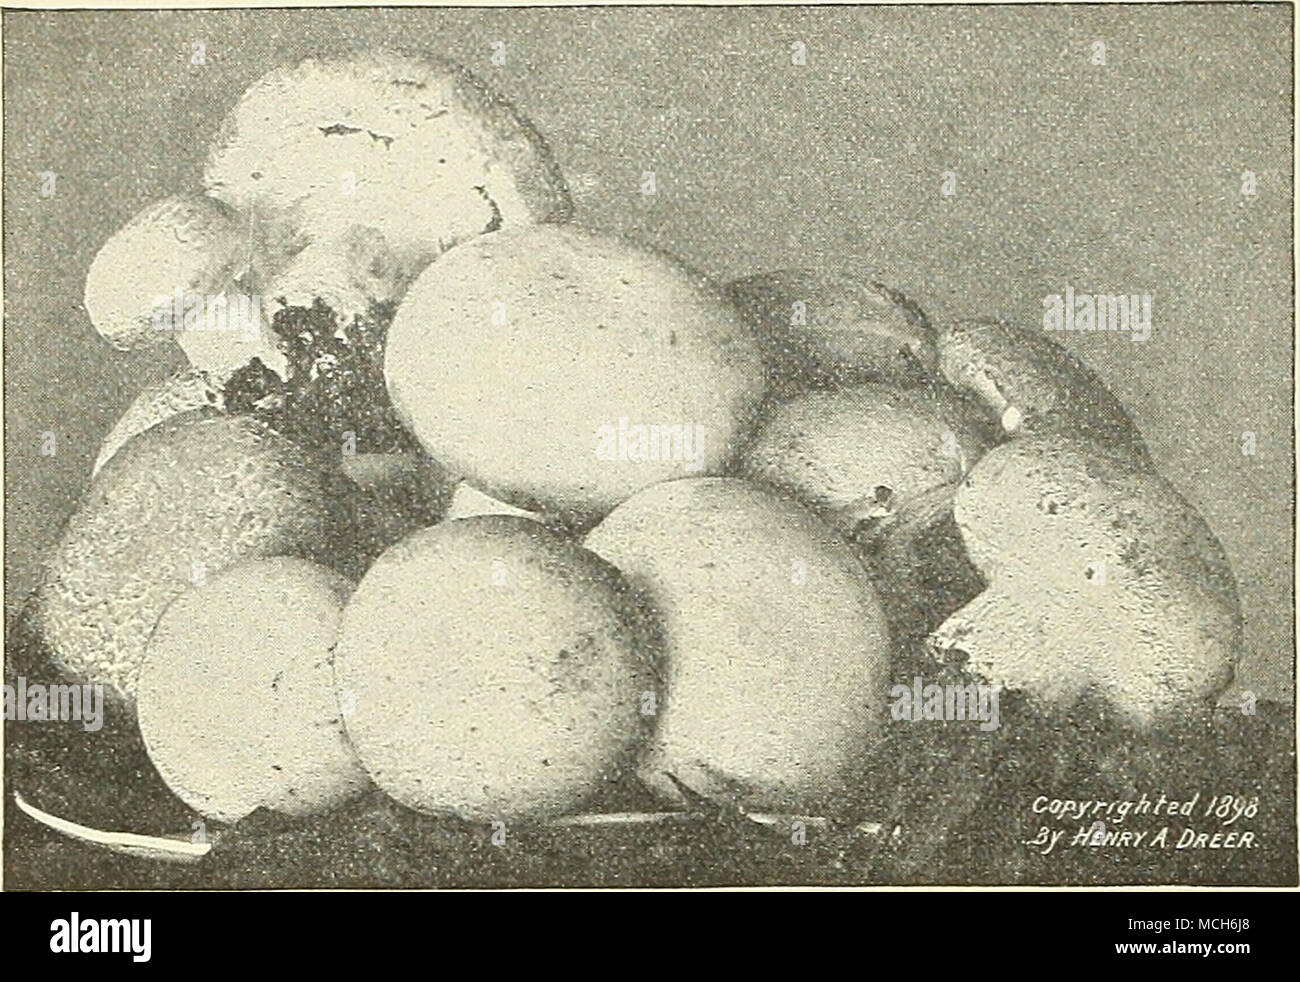 . NEW BOOK ON flUSHROOMS. Geo. F. Atkiiij^on. Contains over 'ioi- half-lone engravings and several colored plates, being the finest illustr?tions of American Mushrooms ever published. The most dangerous varieties are fully illustrated. Full cultural directions, with flashlight photos of ISlushroom houses, cellars, caves, etc. Price, -?3.U0, postpaid. A Pl.^te of Vell-gk')vn Mushkooms. „ ^ —«-wr. cts.; oz., 10 cts.;  lb., 25 cts.; lb., 75 cts. White Creole [White Velvet&quot;). Pods free from ridges and very tender. Pkt., 5 cts.; oz., 10 cts.;  lb., 20 cts.; lb., 60 cts. Improved Long Green Stock Photo